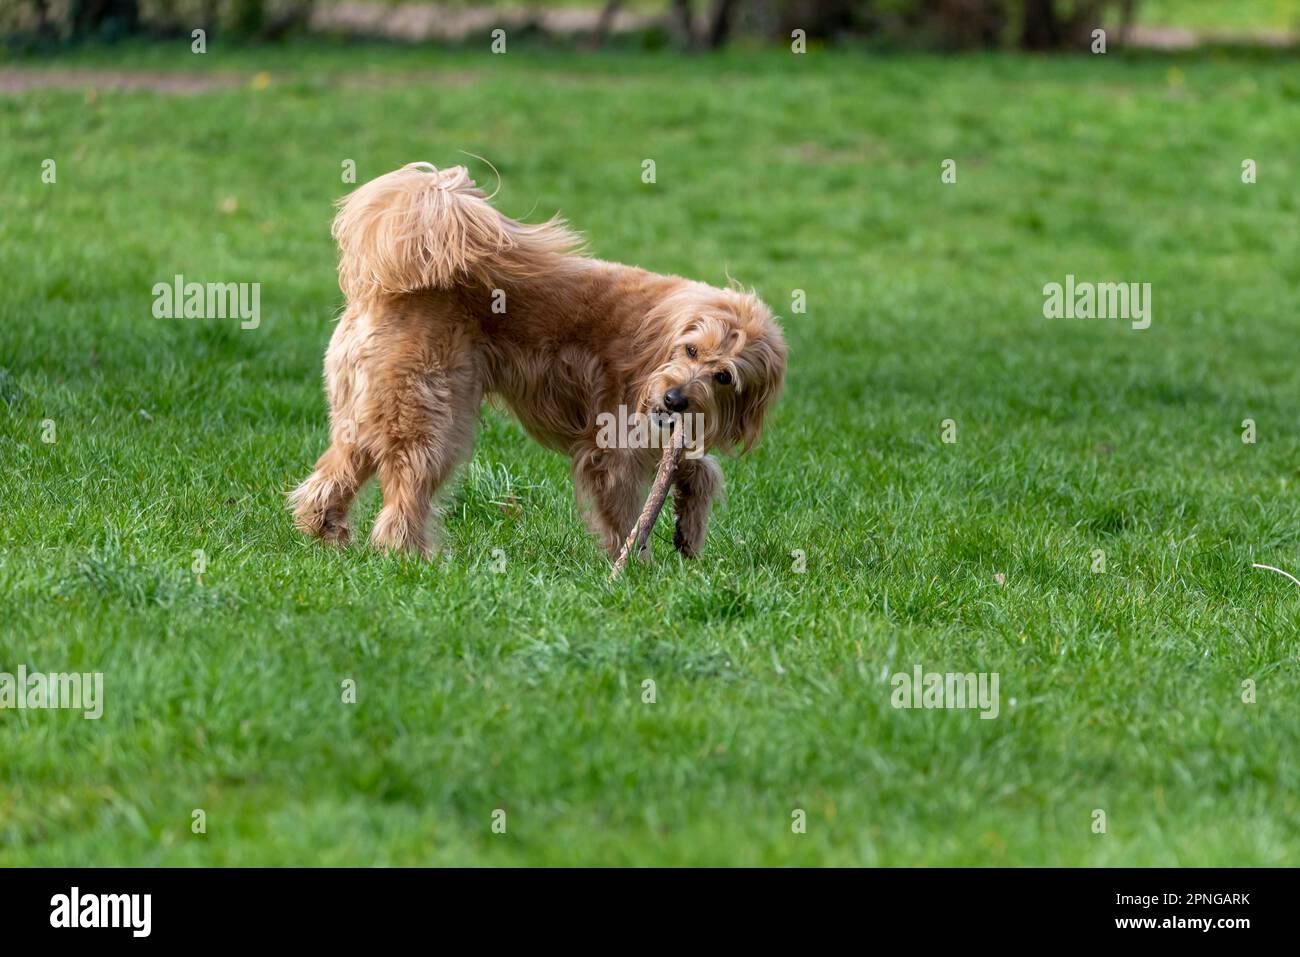 Mini Goldendoodle bites into stick, cross between Golden Retriever and Poodle, dog breed hardly sheds, therefore suitable for allergy sufferers Stock Photo